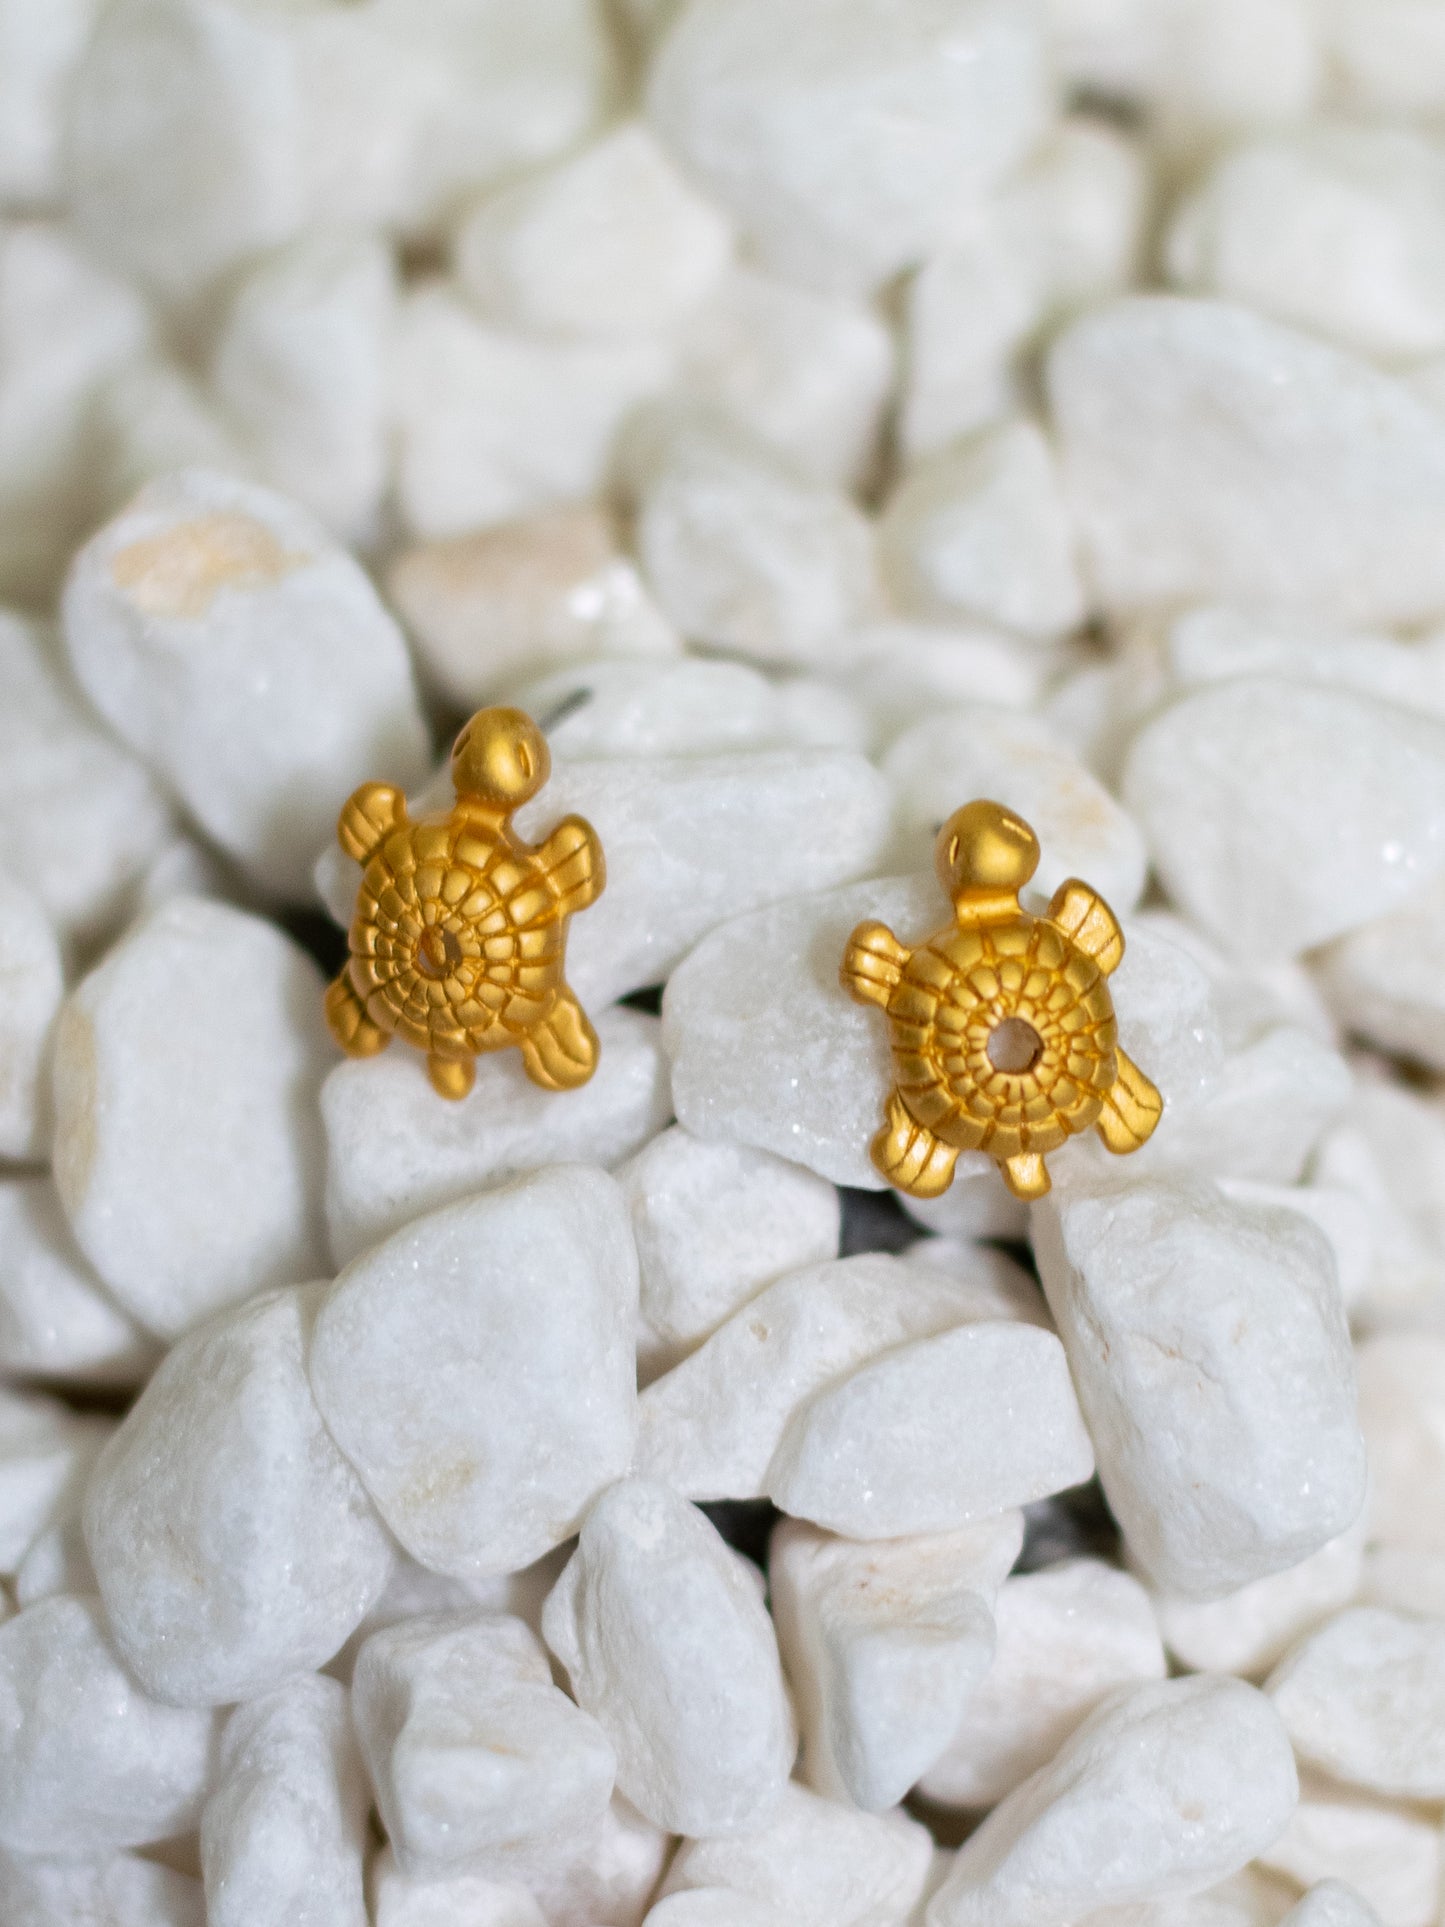 24K Gold Plated Pre-Columbian Muisca Turtle Shaped Earrings.